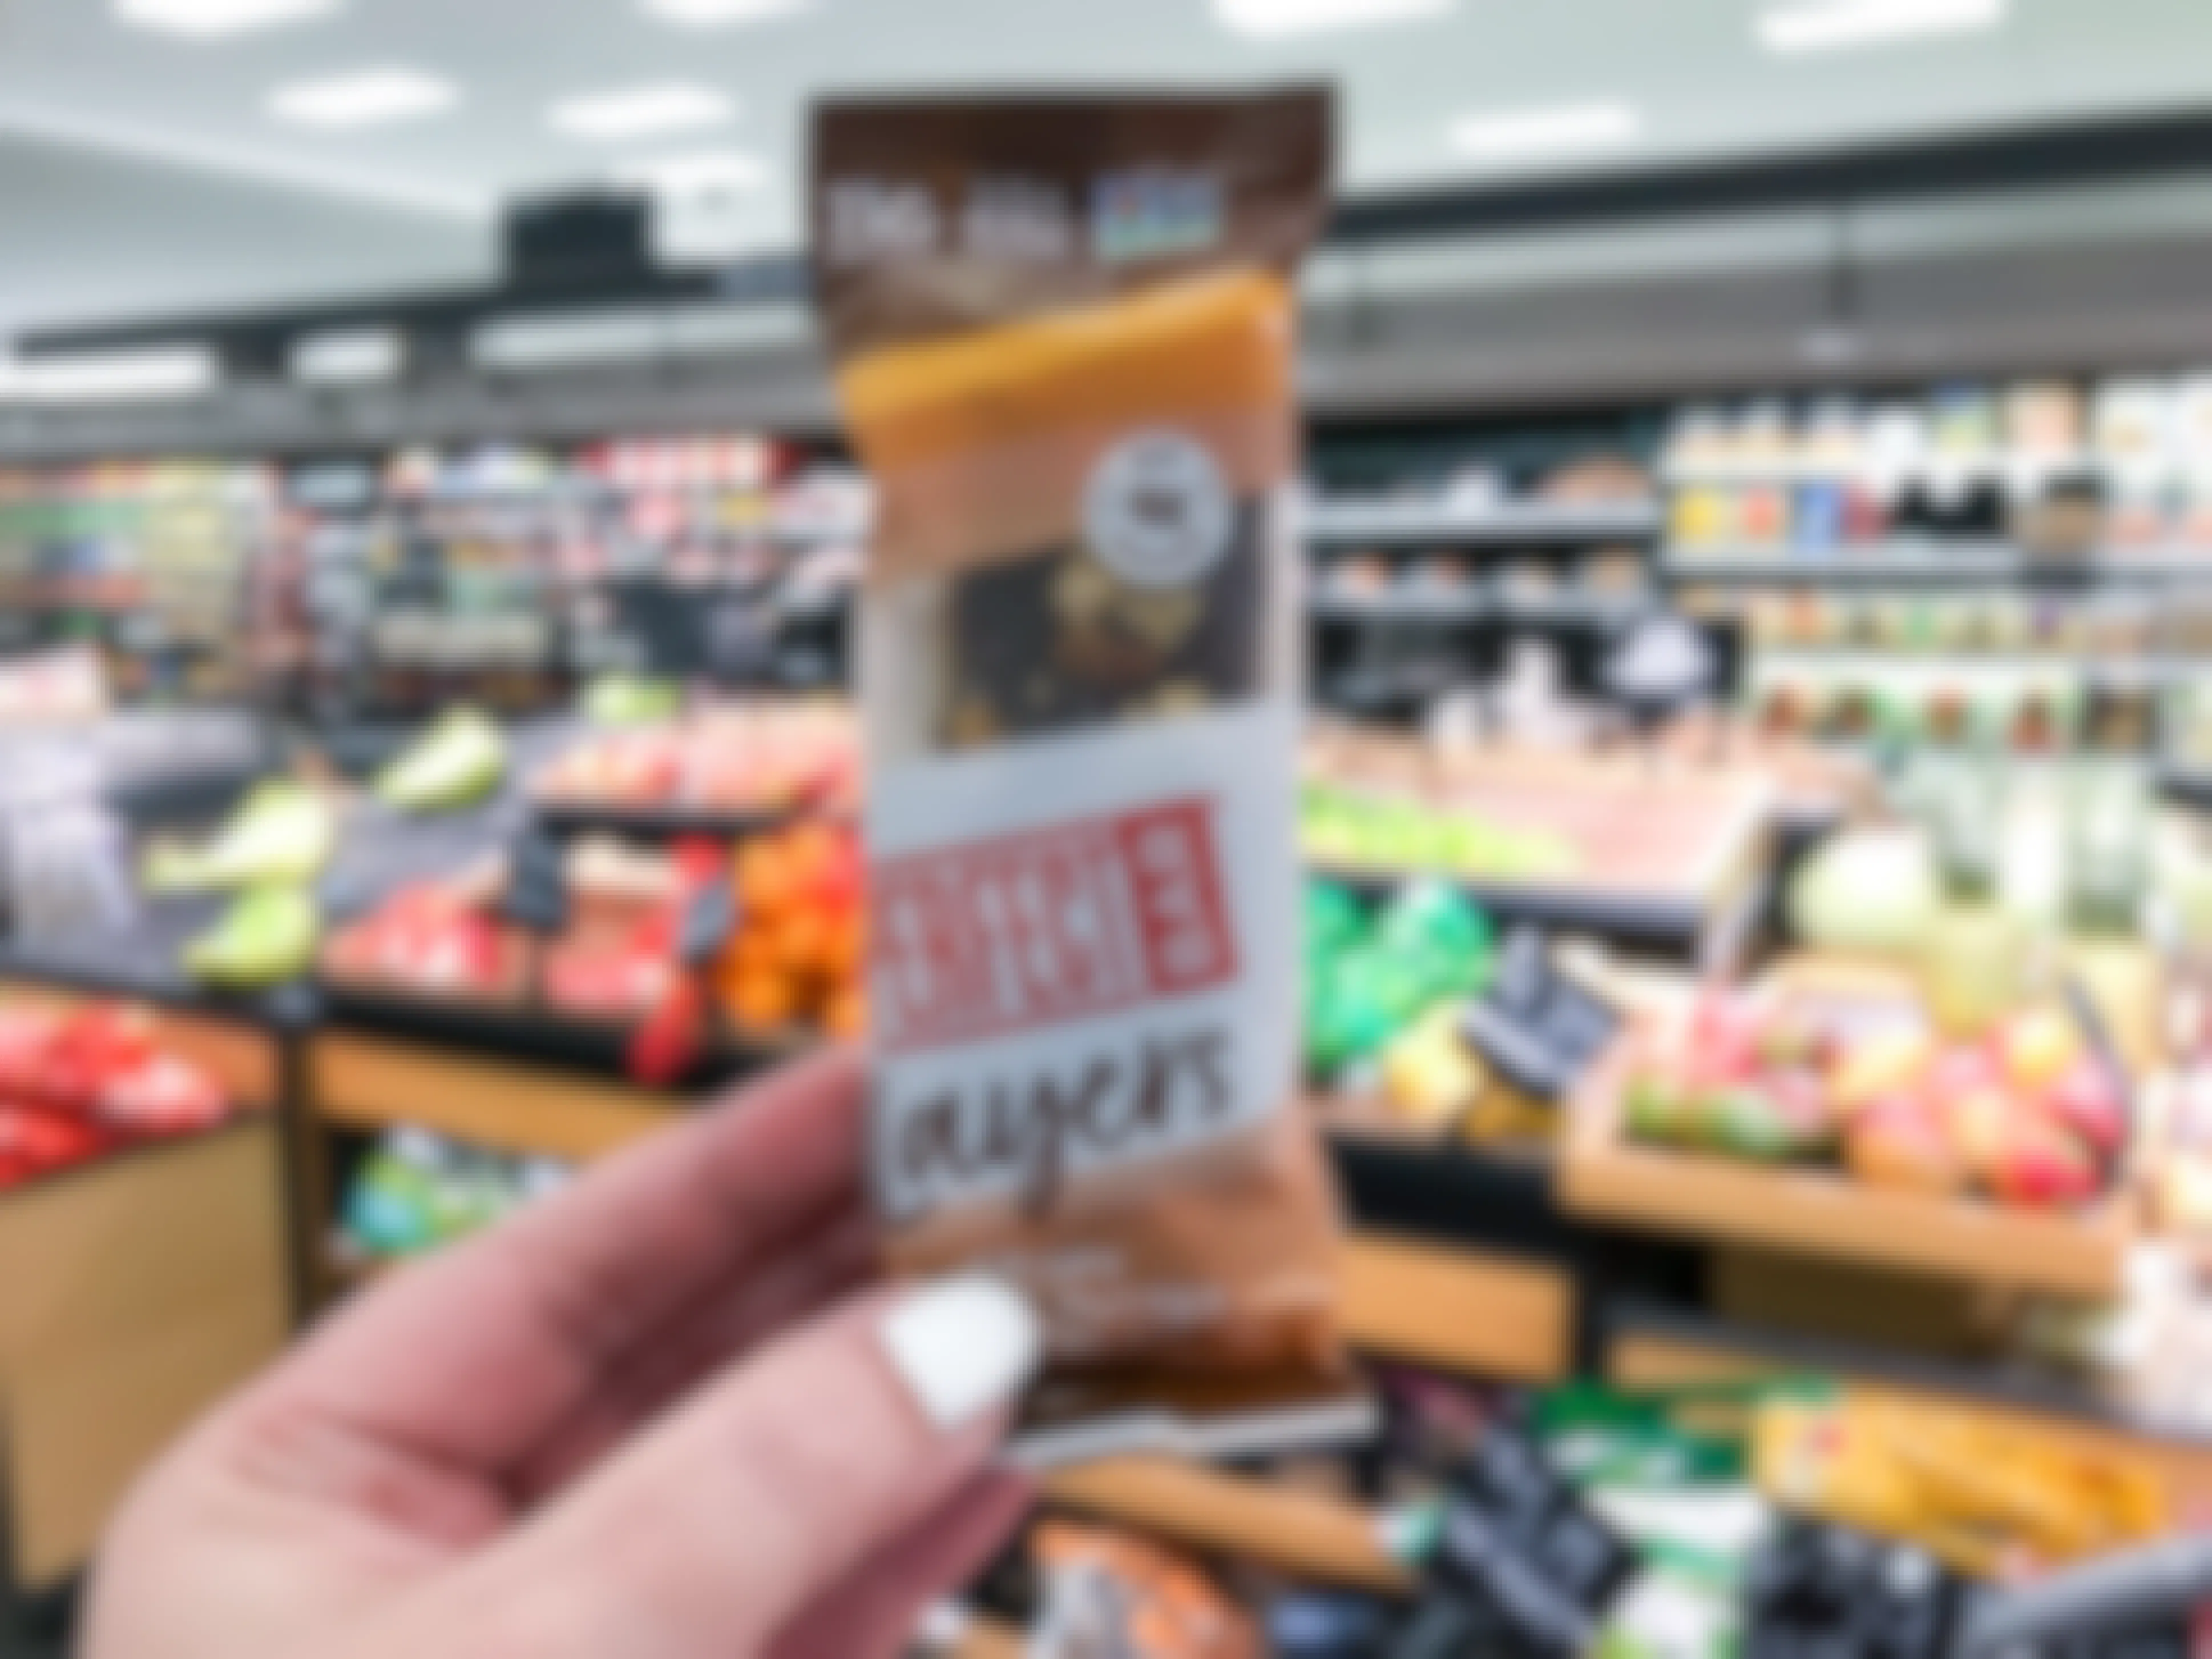 $1.25 Moneymaker on Perfect Bars and $0.54 Layers Bars at Target